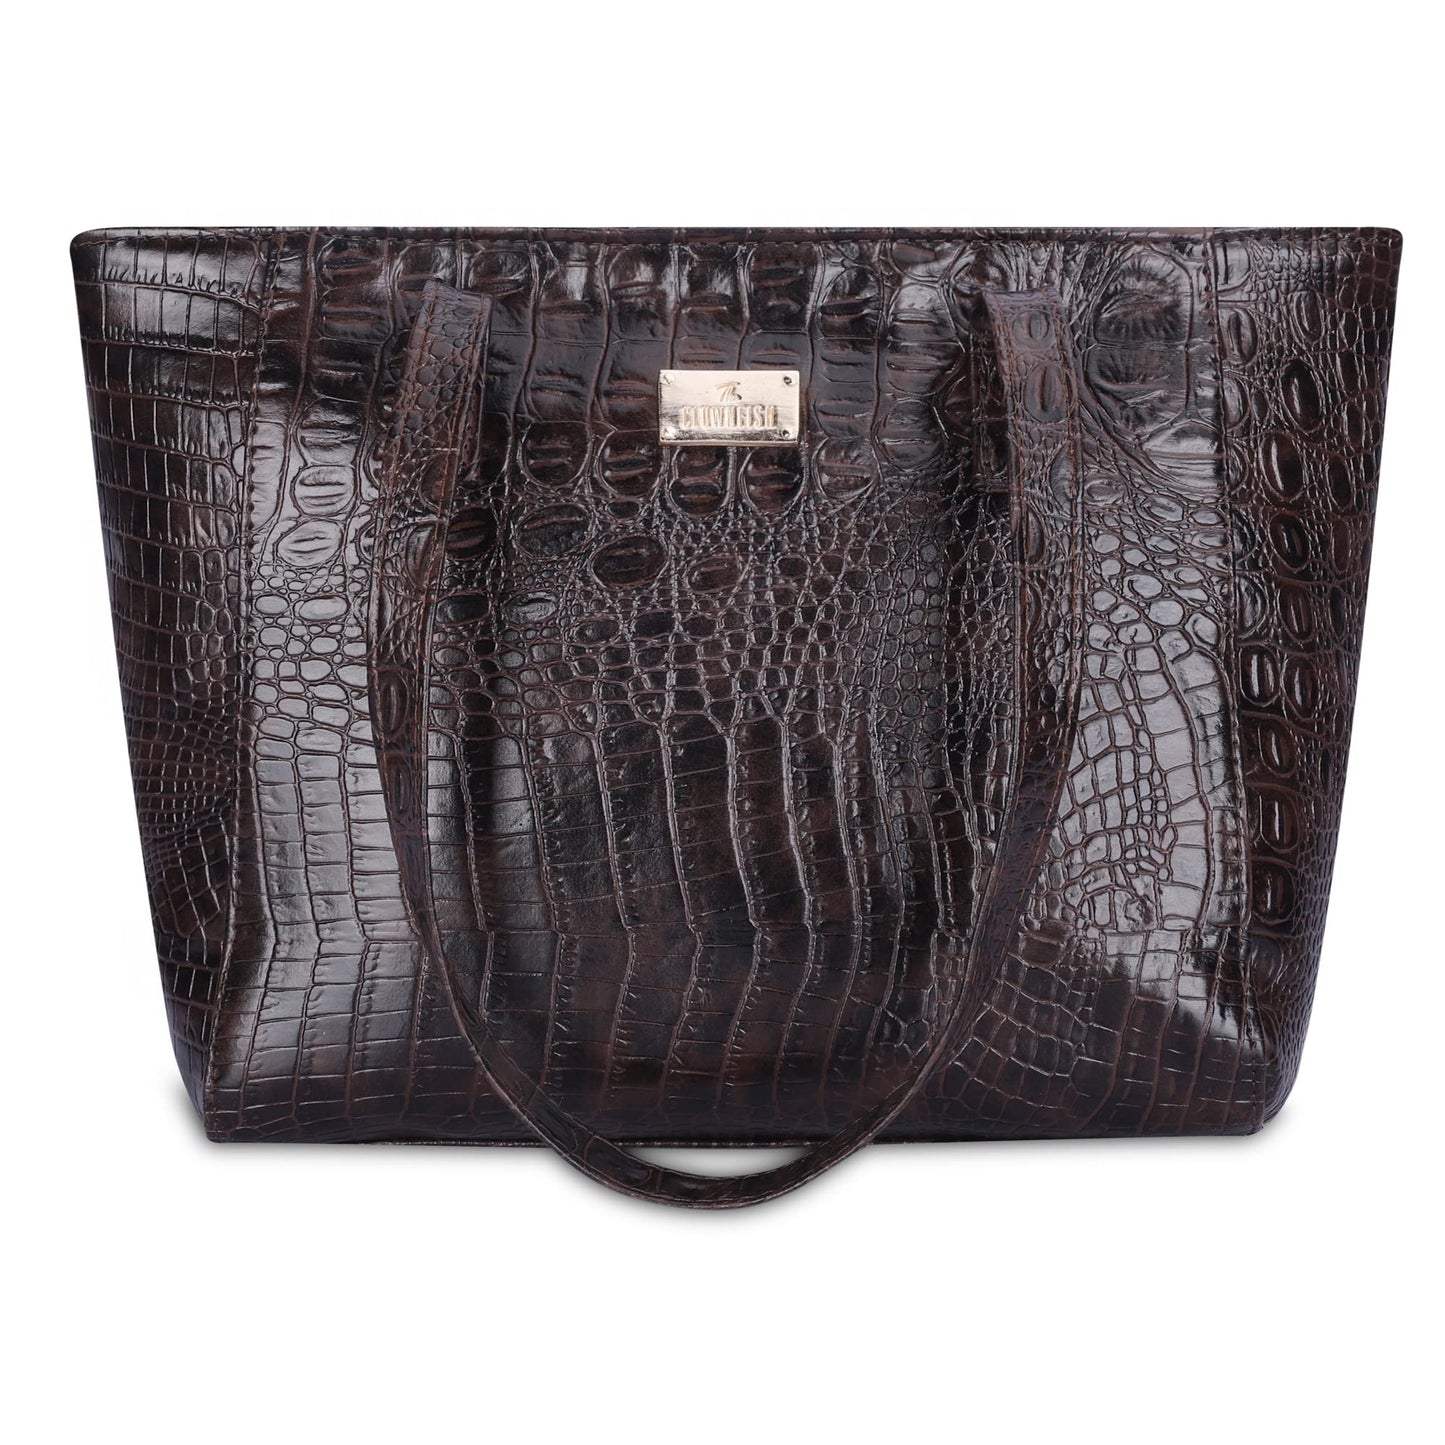 THE CLOWNFISH Valentine Faux Leather Handbag for Women Office Bag Ladies Shoulder Bag Tote for Women College Girls (Dark Brown-Crocodile Texture)